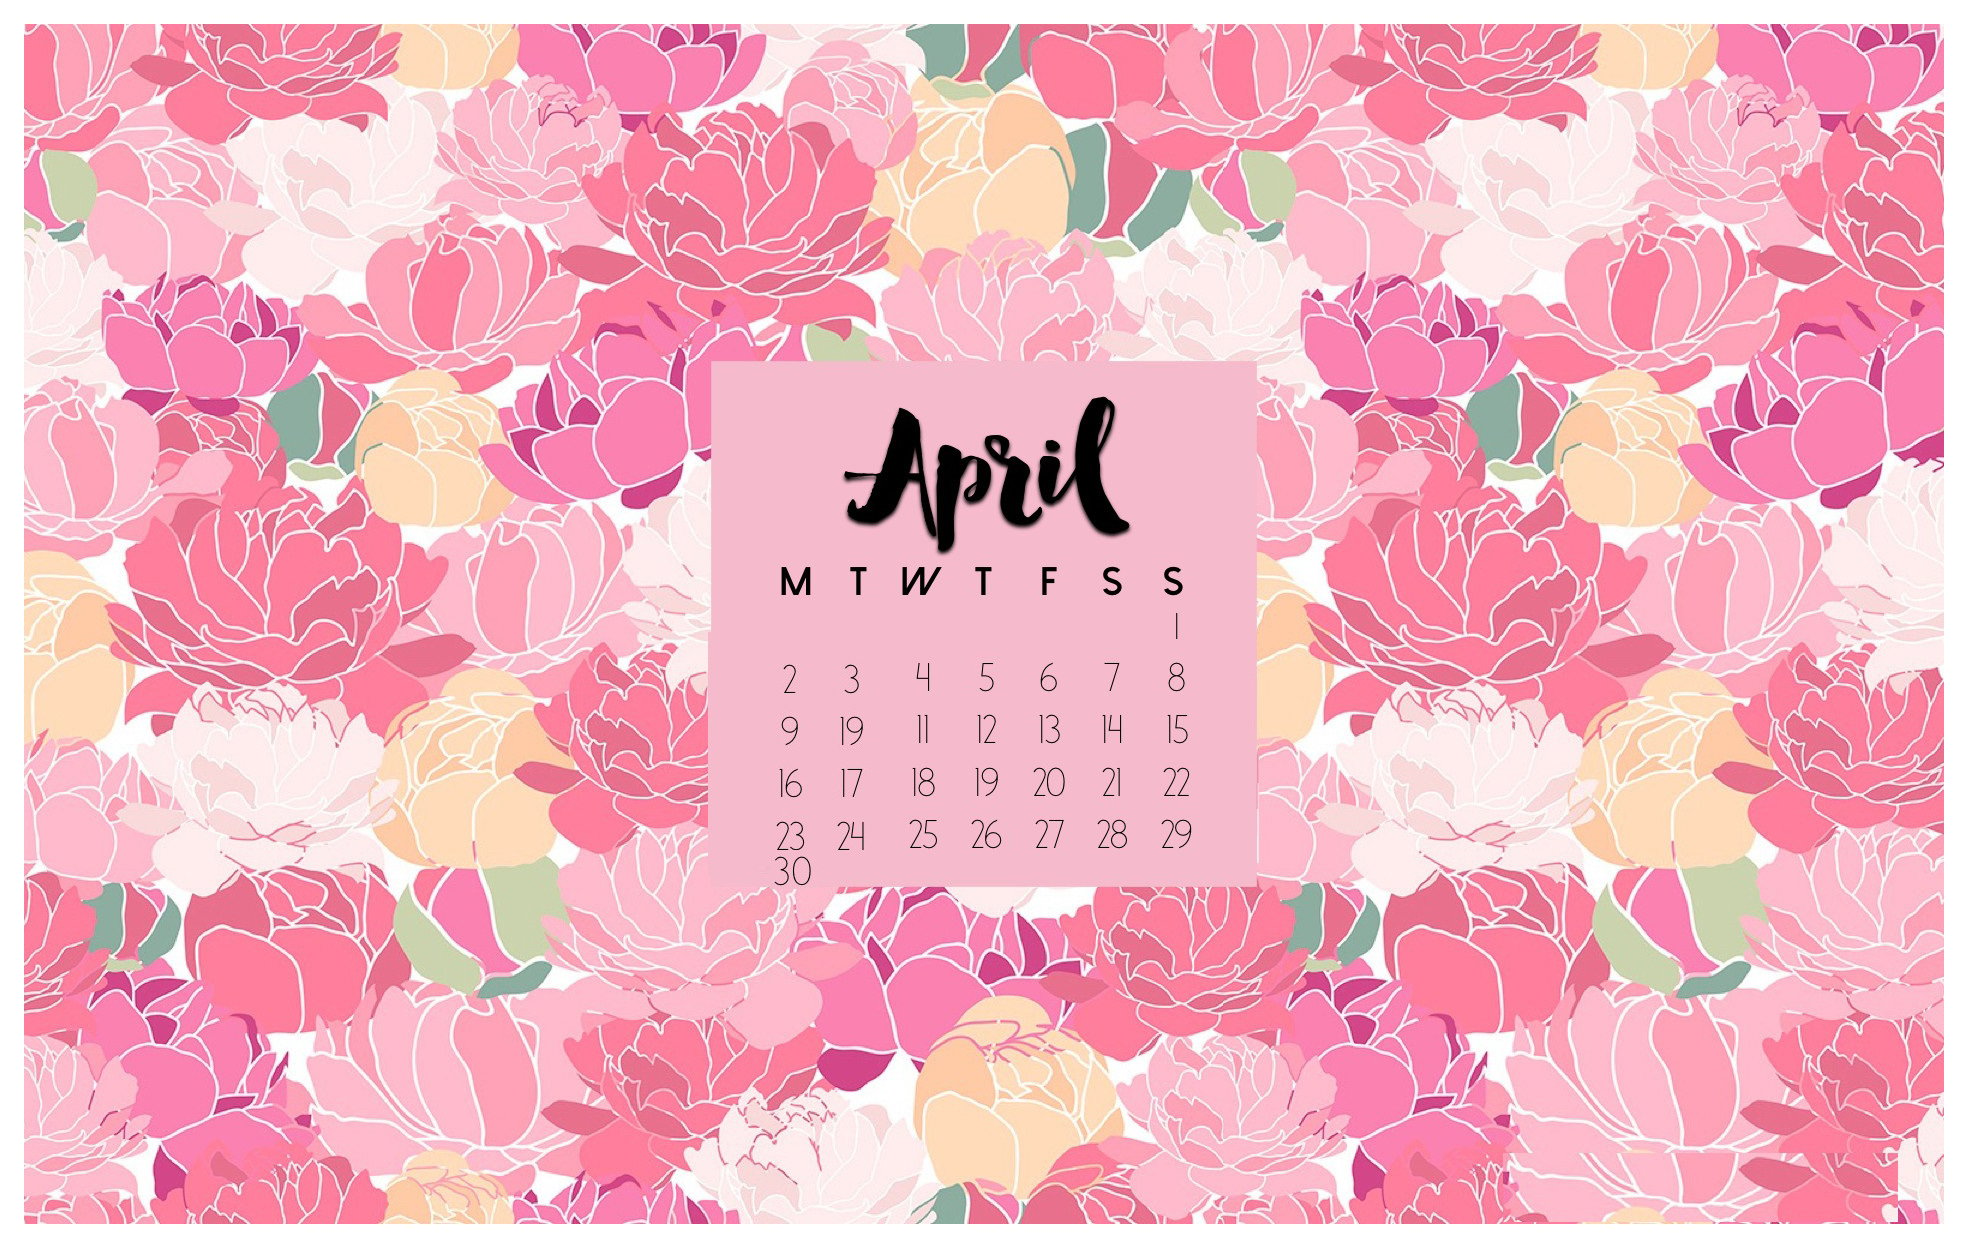 Wallpaper with April 2018 Calendar for PC iPad and SmartPhone 1974x1251